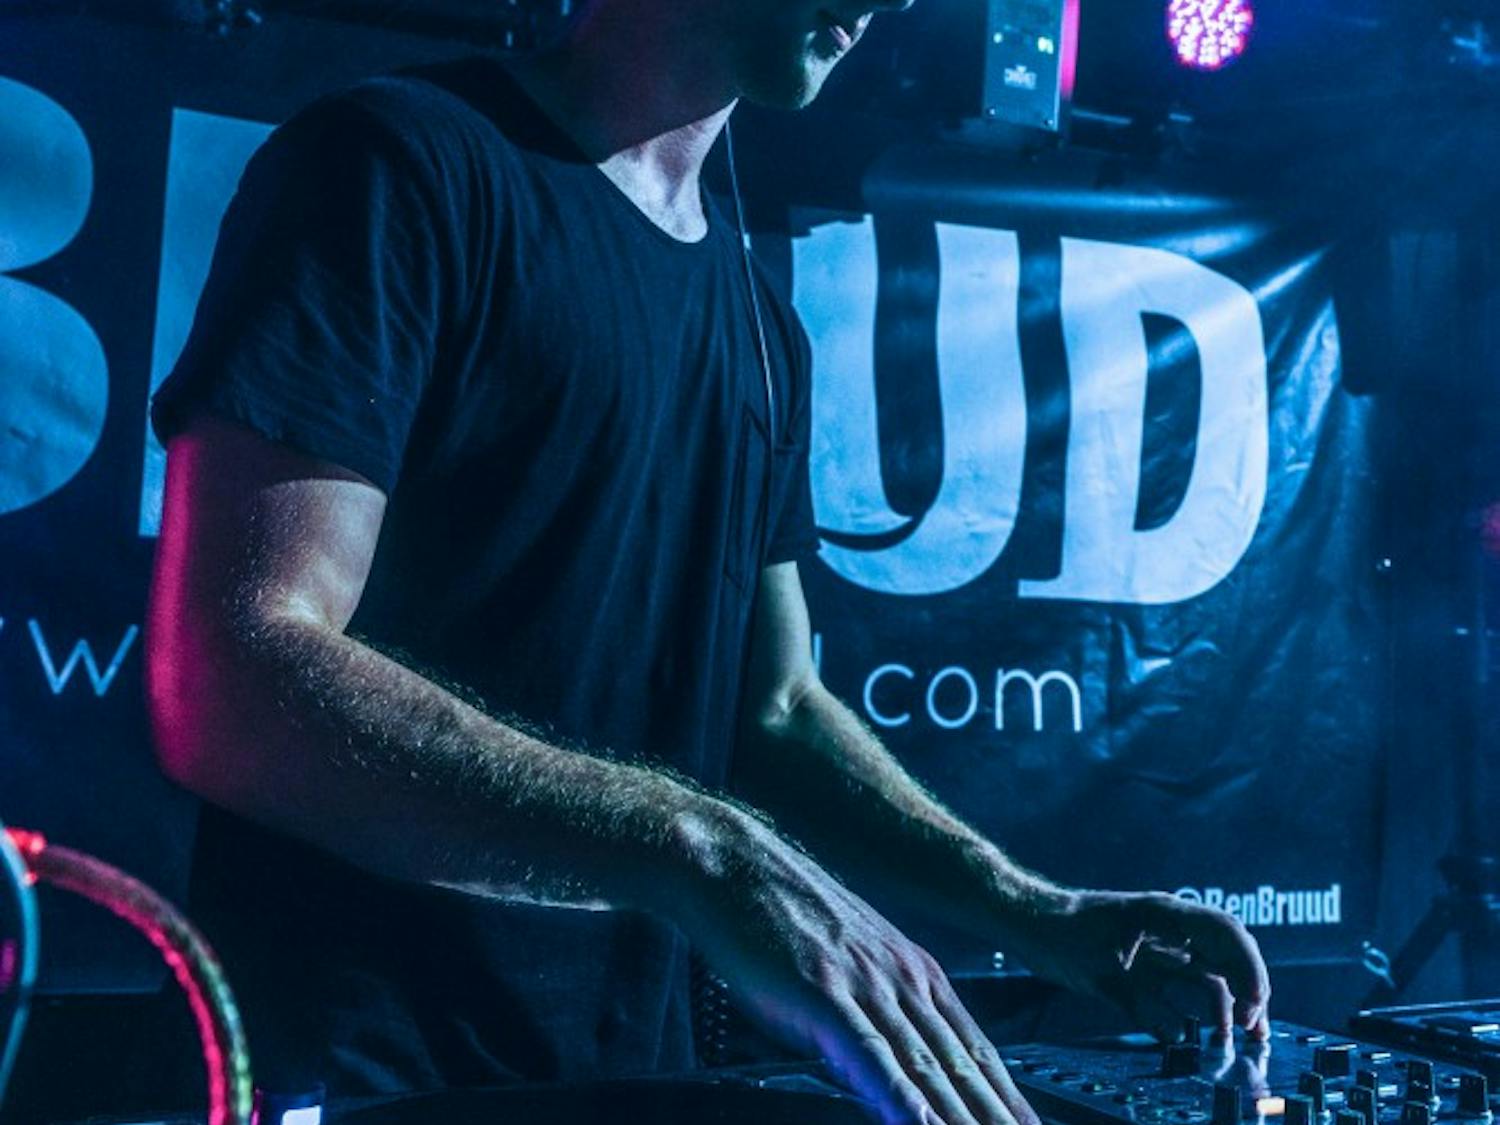 Ben Neuffer, popularly known as Ben Bruud, has been DJing for 13 years.&nbsp;